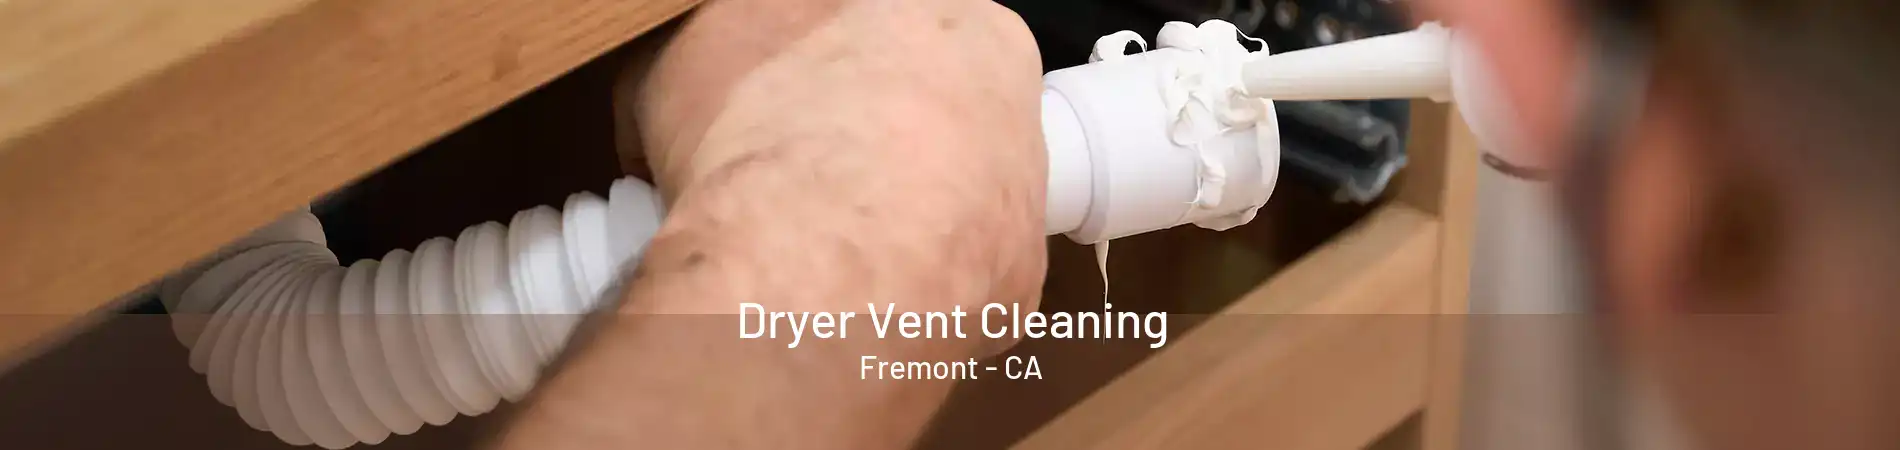 Dryer Vent Cleaning Fremont - CA